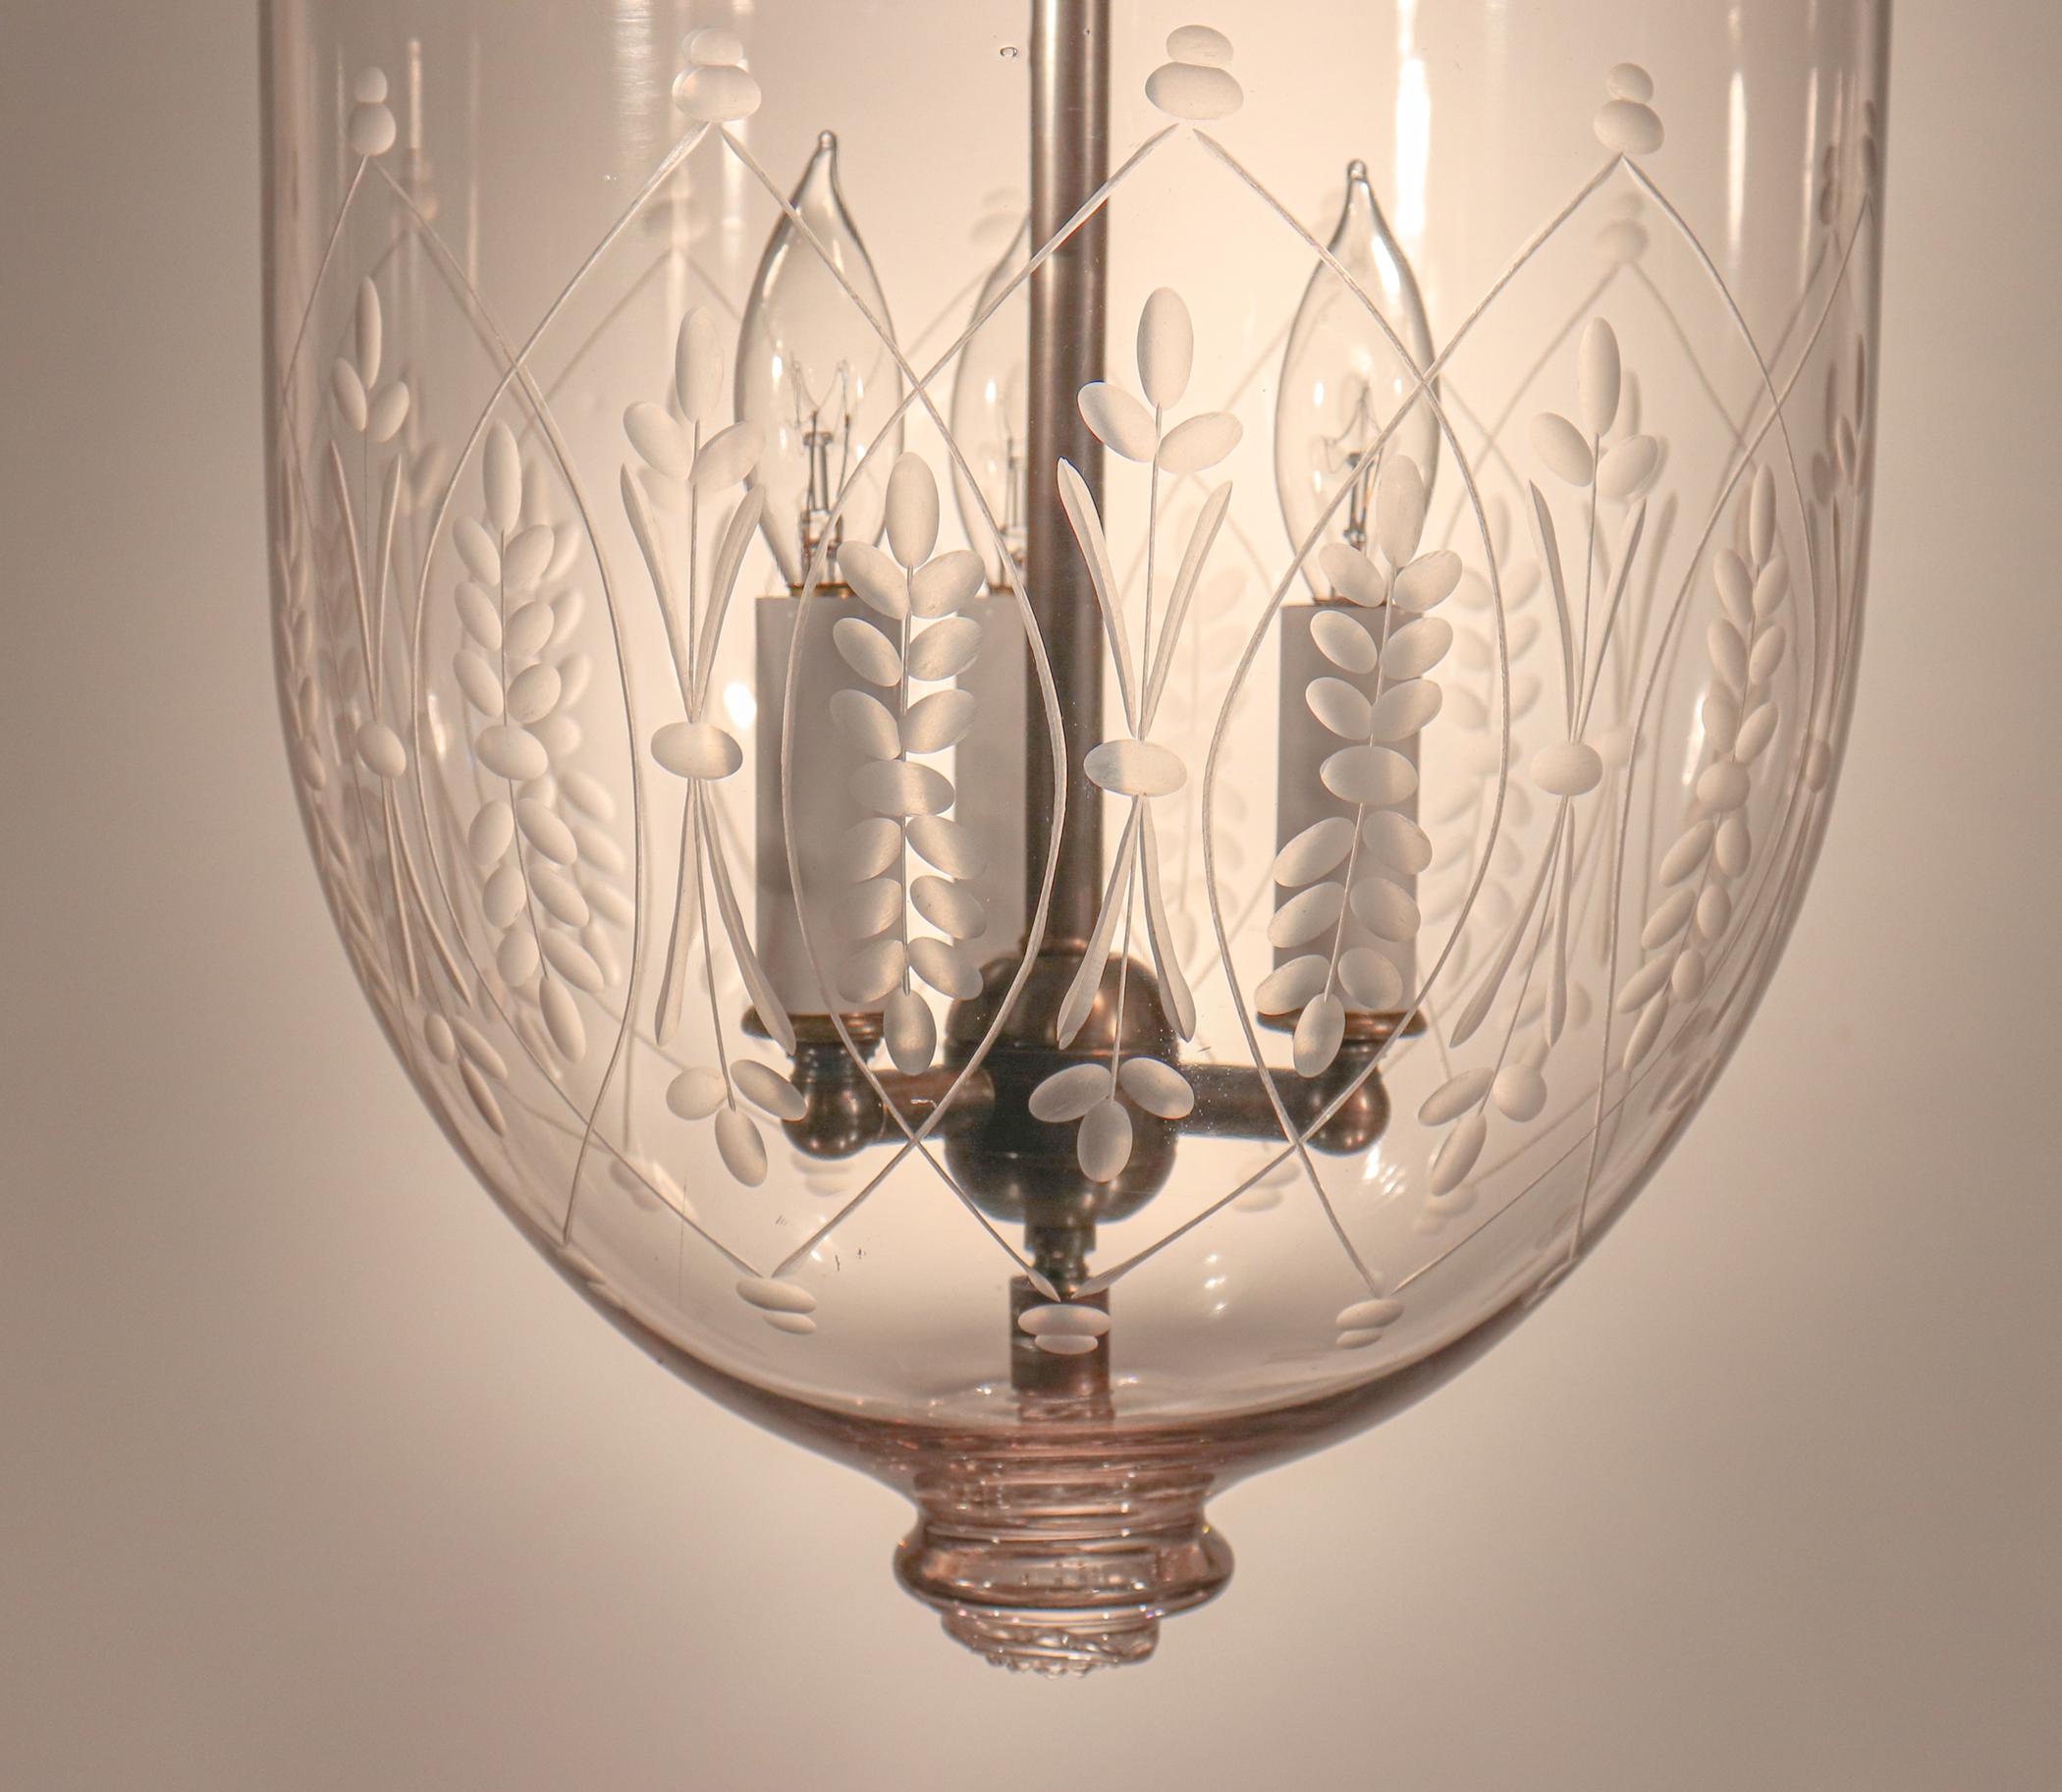 Glass Antique Bell Jar Lantern with Wheat Etching